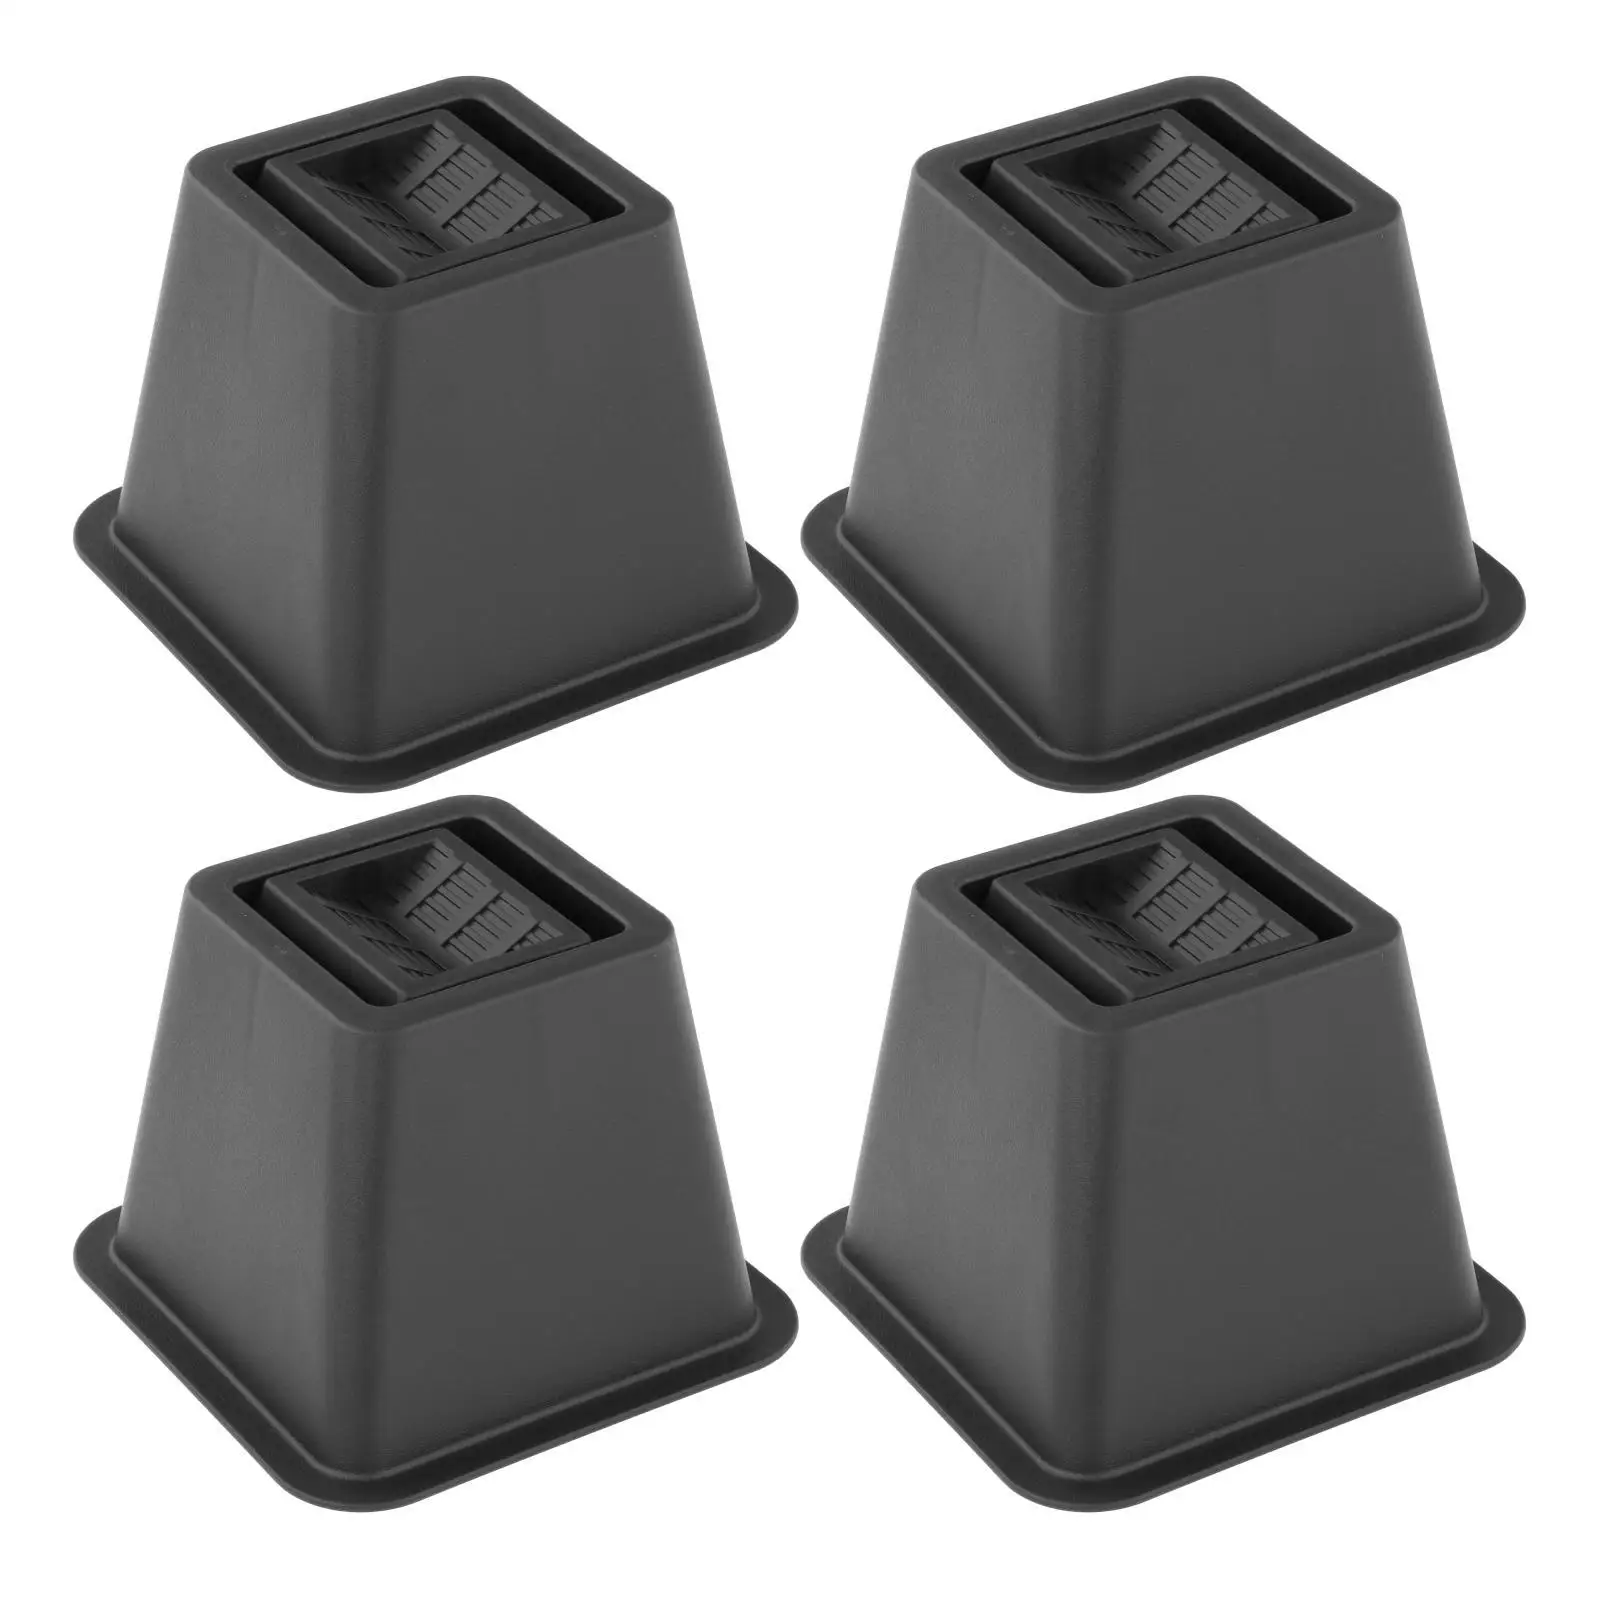 4 Pieces Heavy Duty Furniture Bed Risers Free Moving Bed Elevators Non Skid Floor Protector for Sofa and Table Support